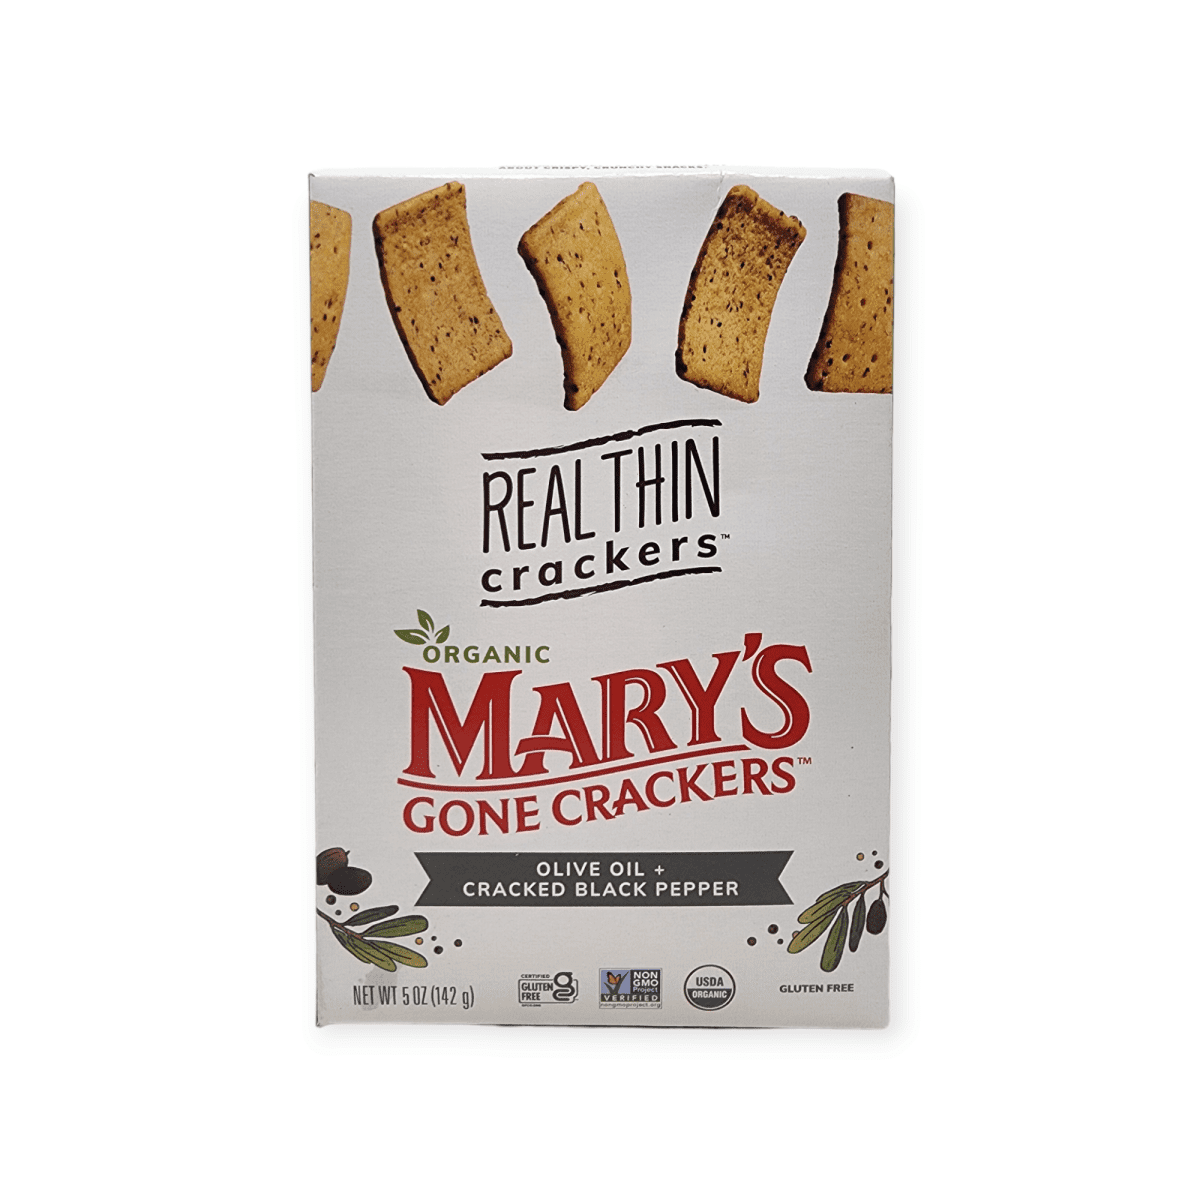 Mary’s Real Thin Crackers Oliva Oil Cracked Black Pepper (142g)